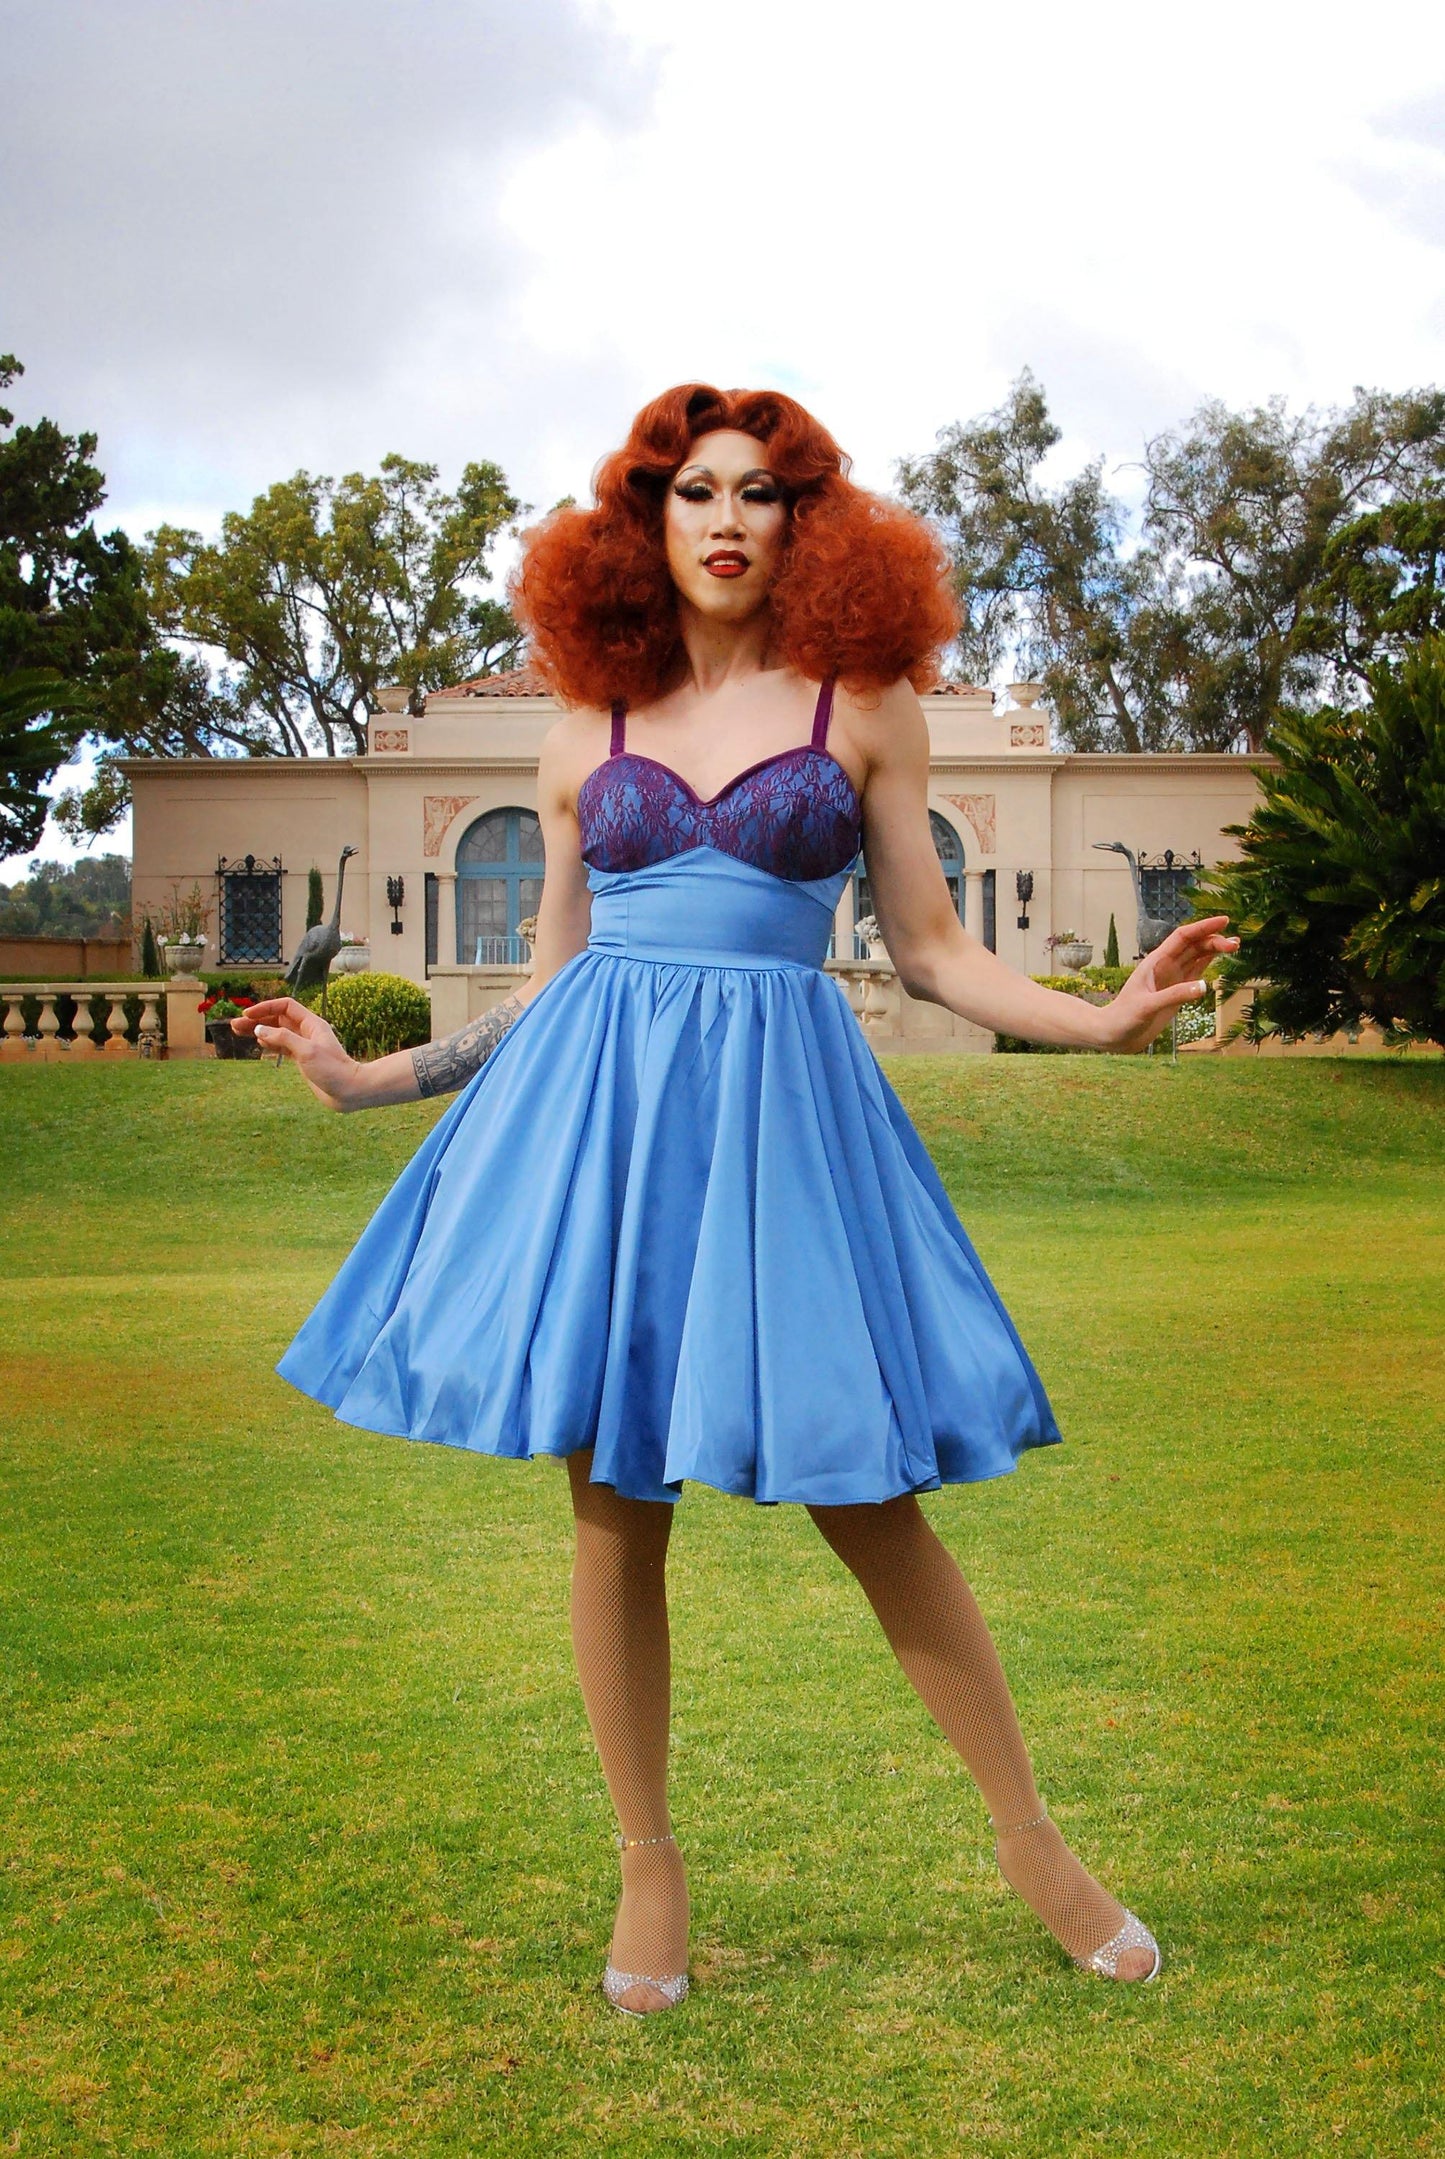 Courtney Vintage Swing Dress in Blue Satin | Pinup Couture - pinupgirlclothing.com